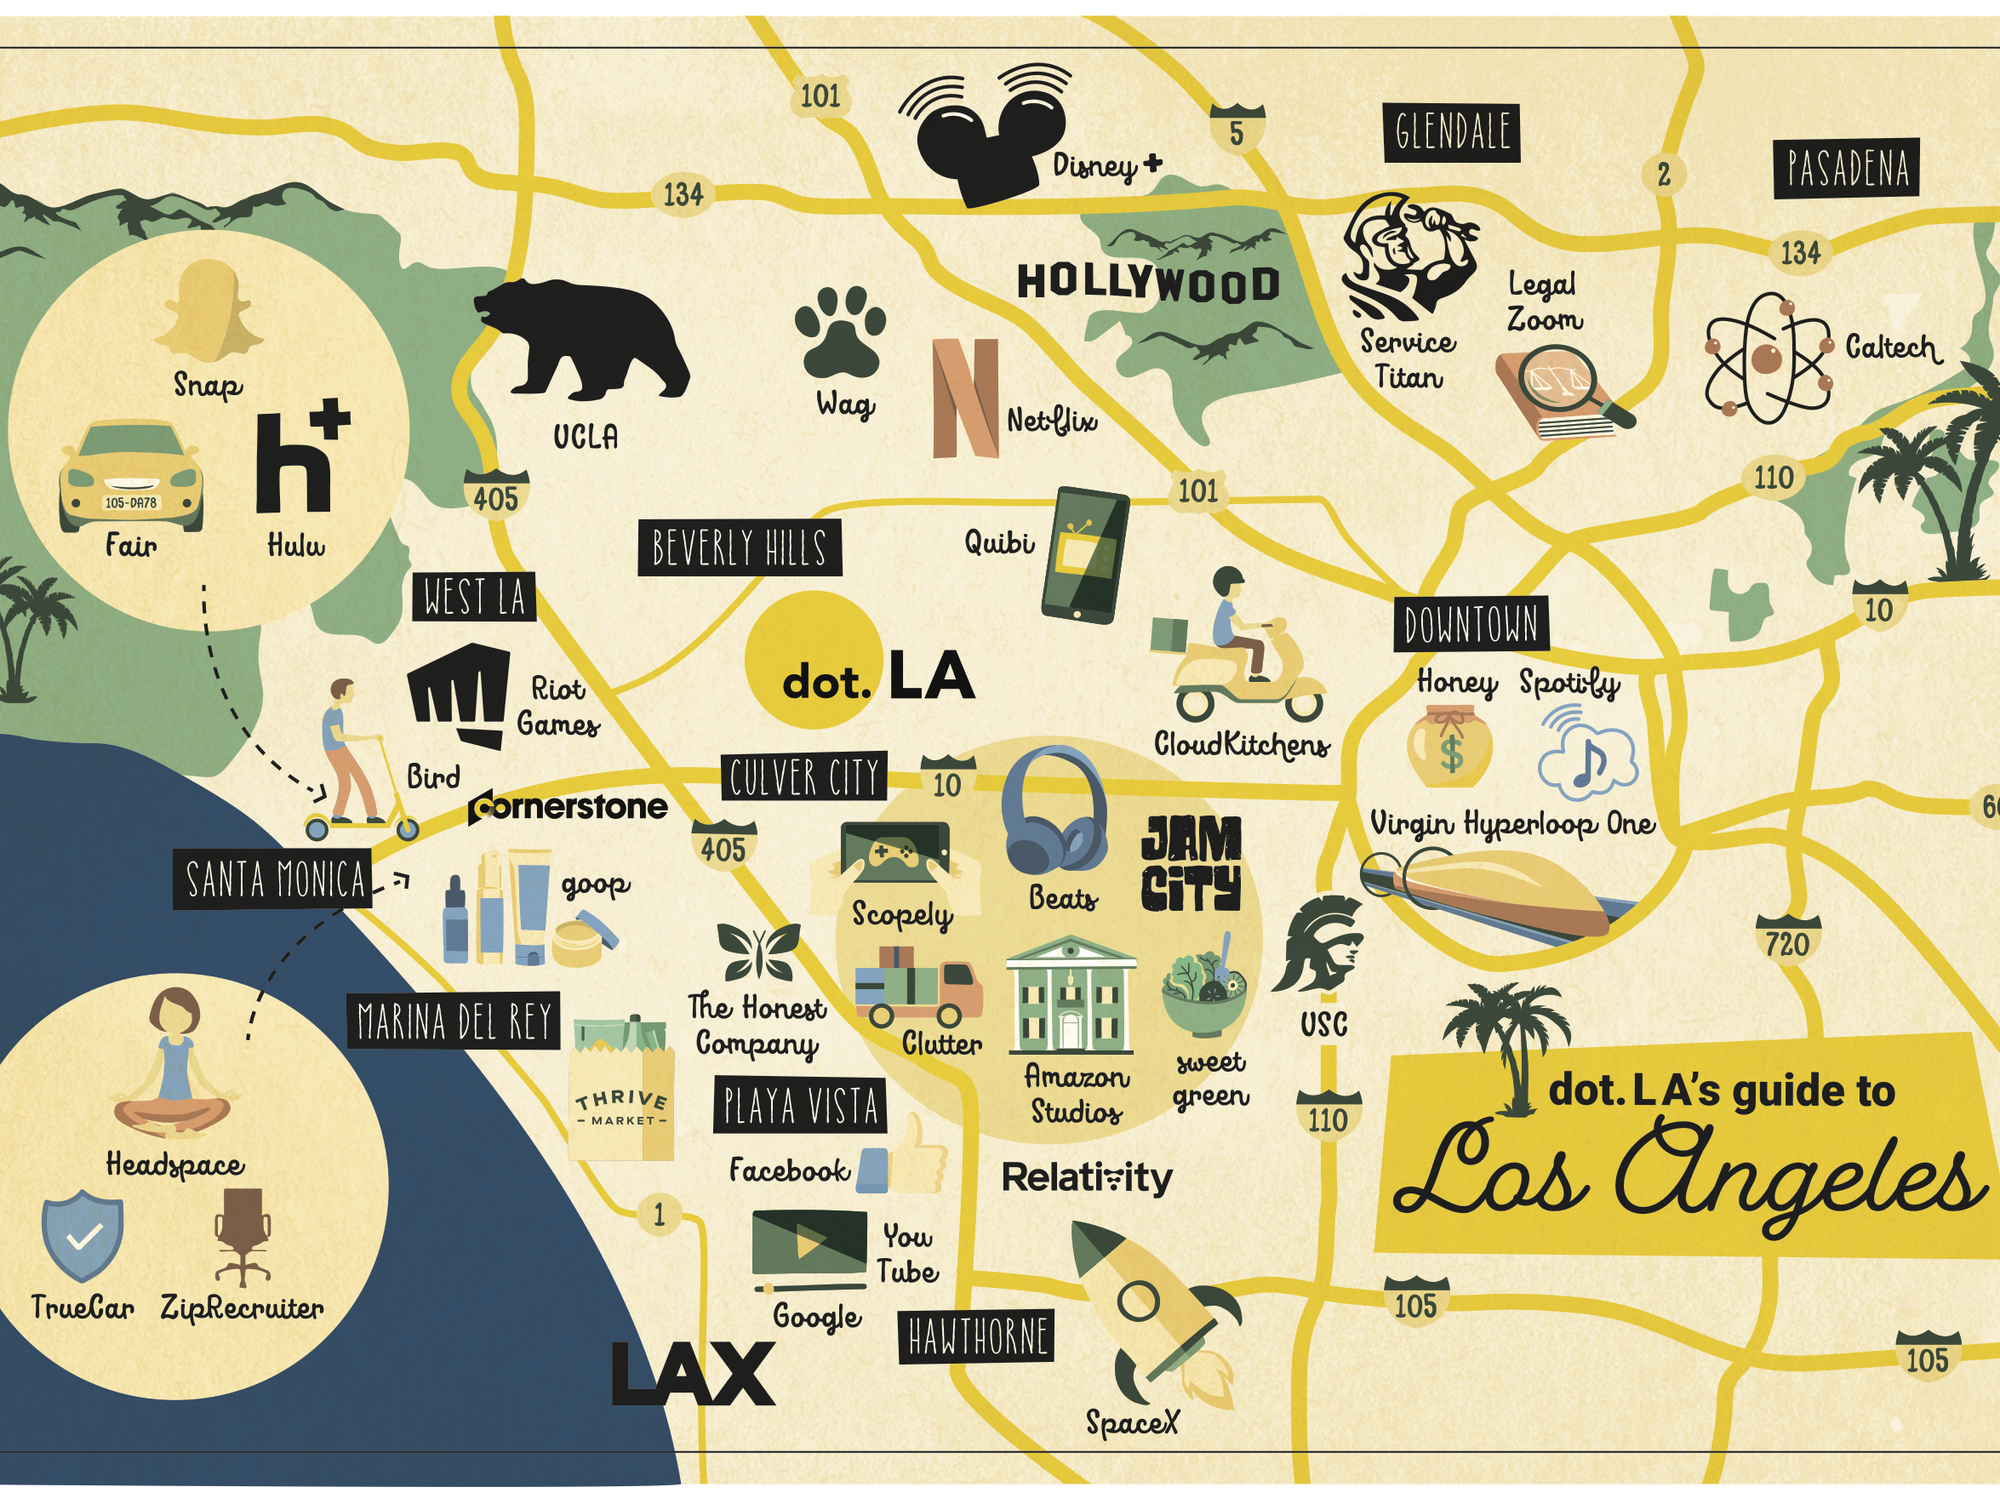 Local Venture Funding Is Growing, but Not the Share Funding LA Startups